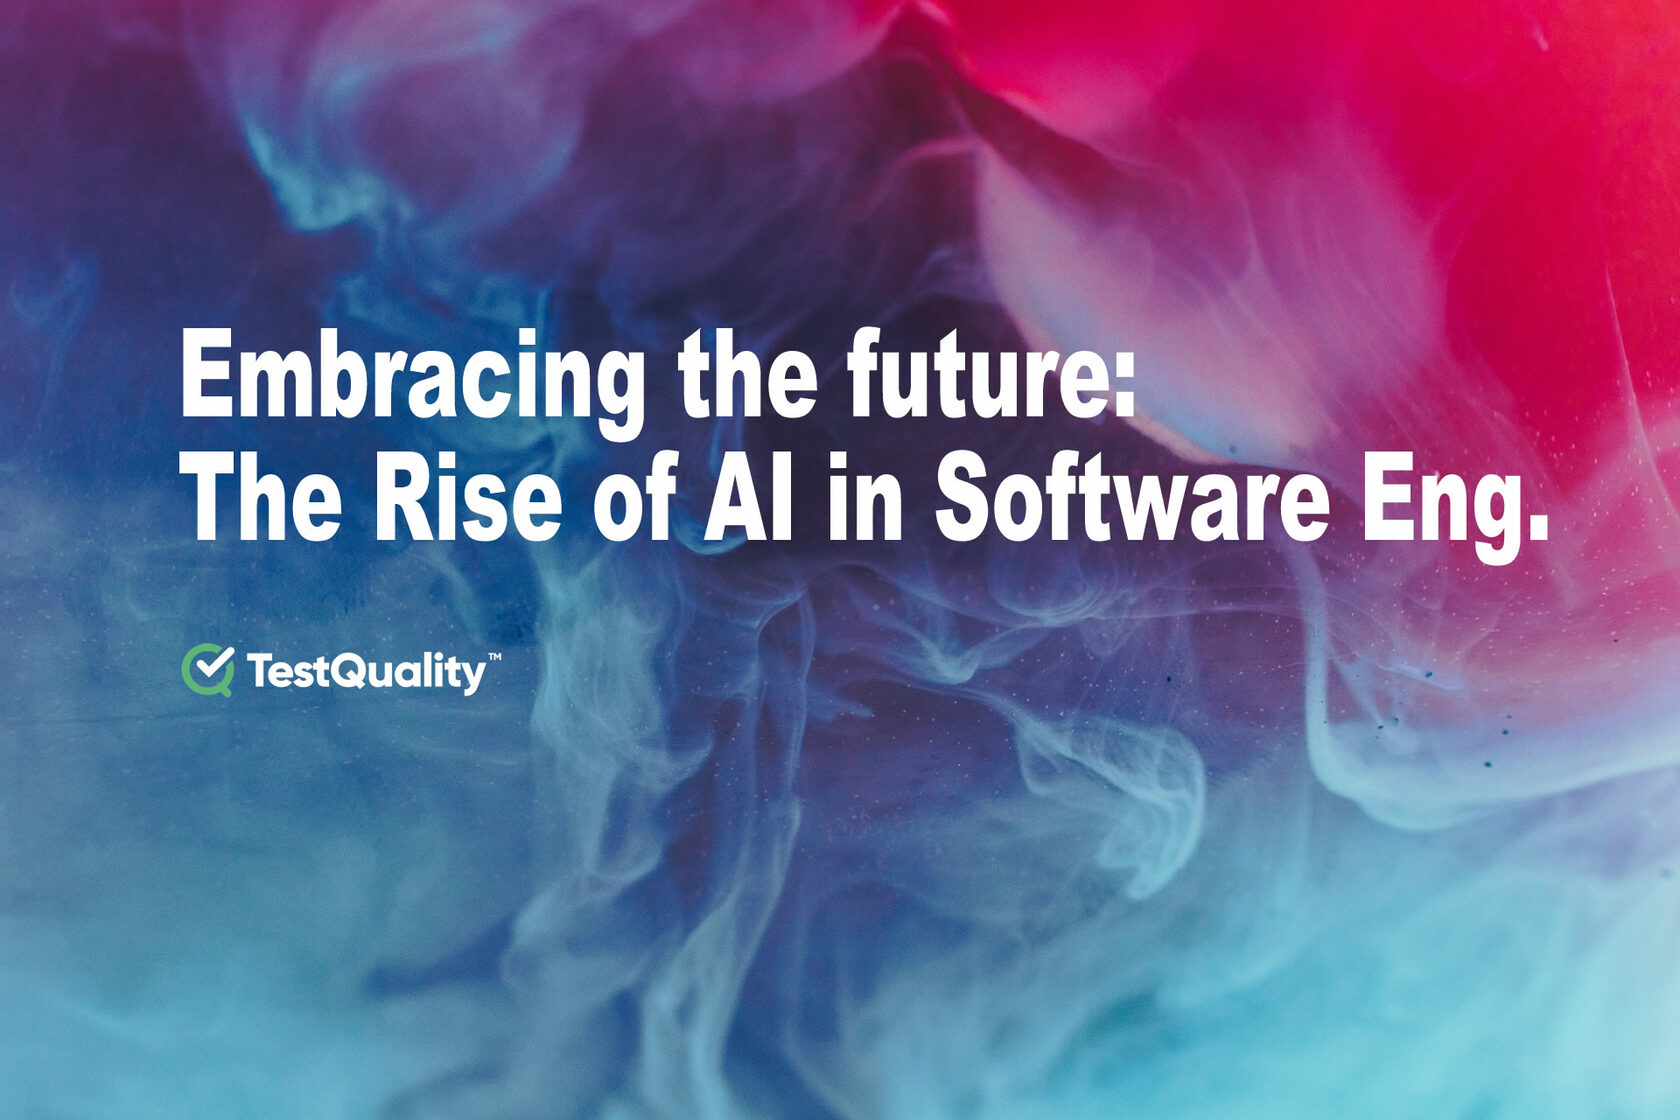 Software Engineering and Artificial Intelligence | The Future | TestQuality